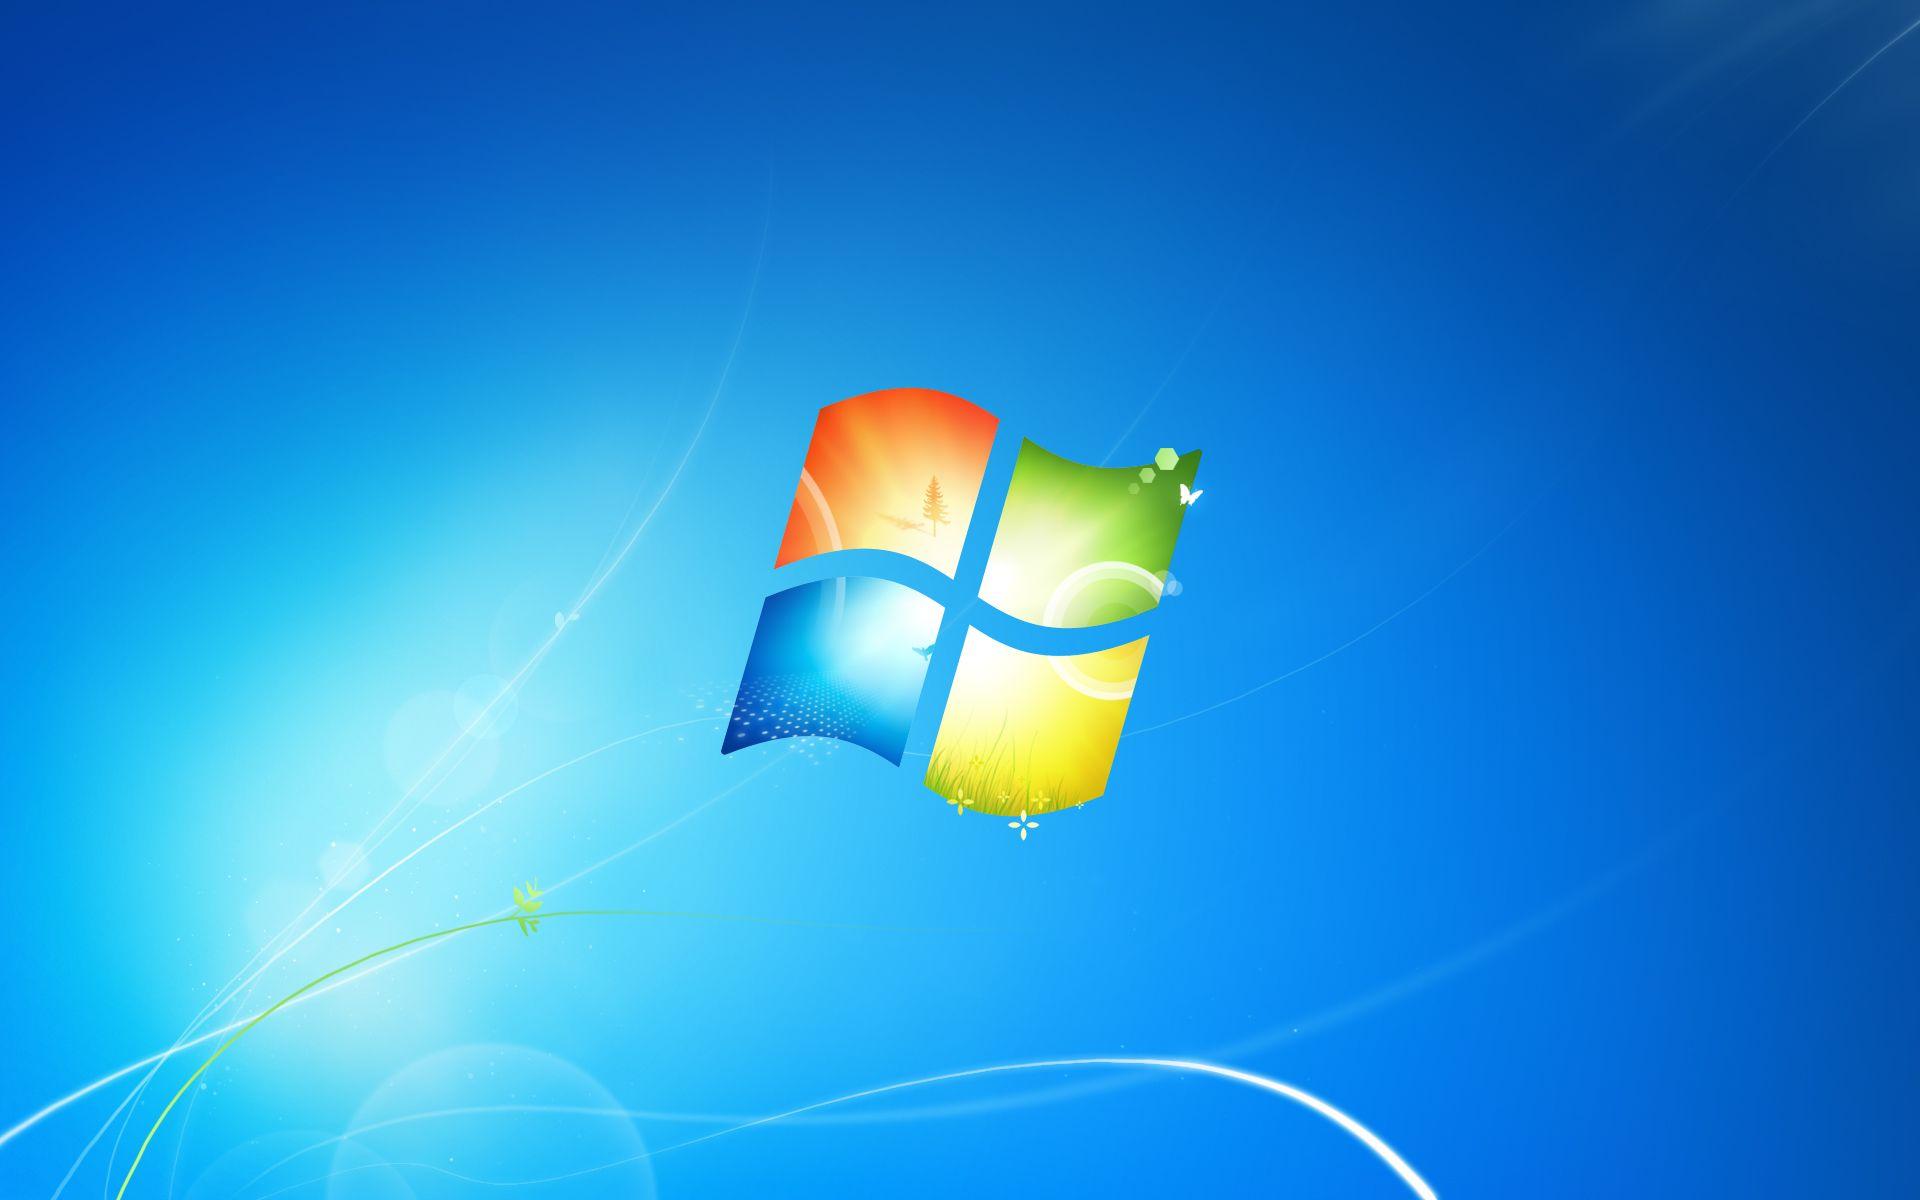 Windows 7 Official Wallpapers  Wallpaper Cave